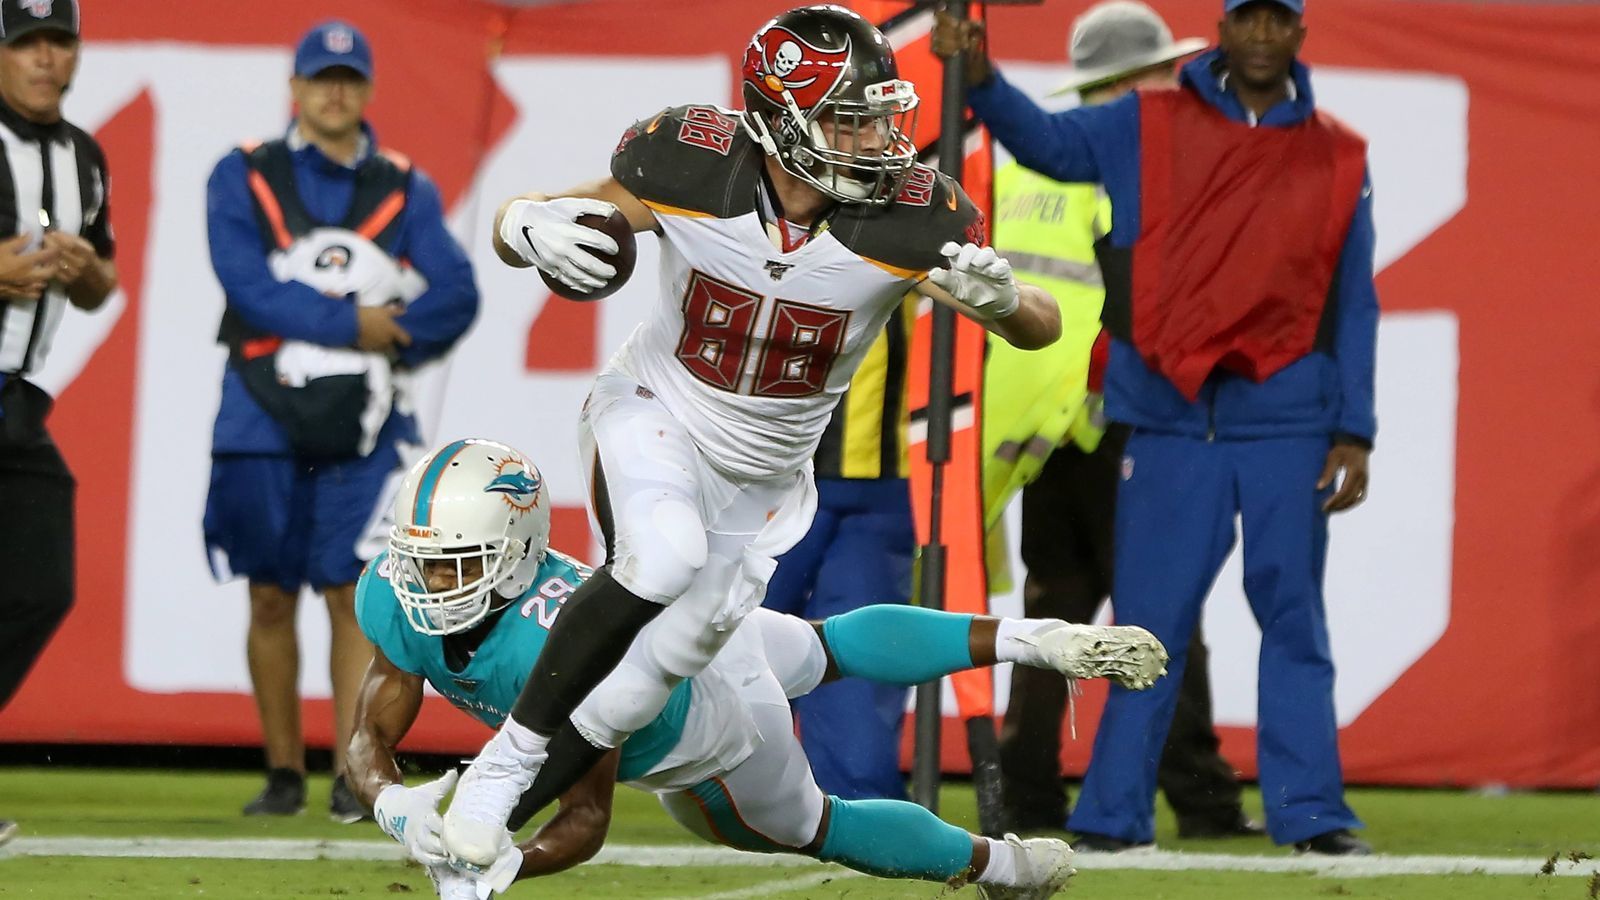 
                <strong>Tanner Hudson (Tight End, Tampa Bay Buccaneers)</strong><br>
                Receiving Touchdowns: 3
              